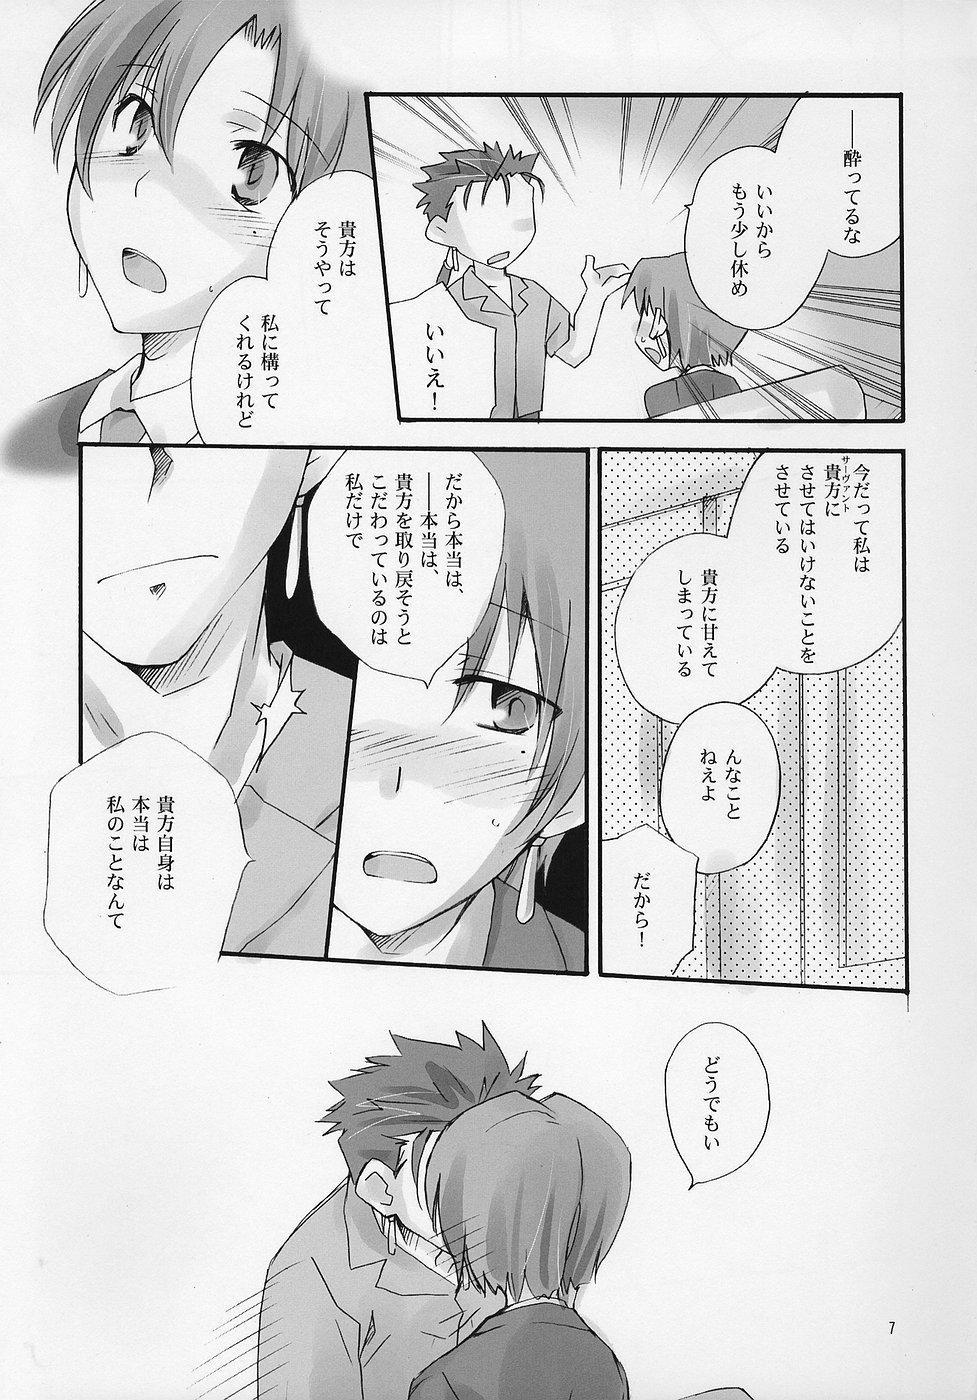 Glasses Honeywhip - Fate hollow ataraxia Stretch - Page 6